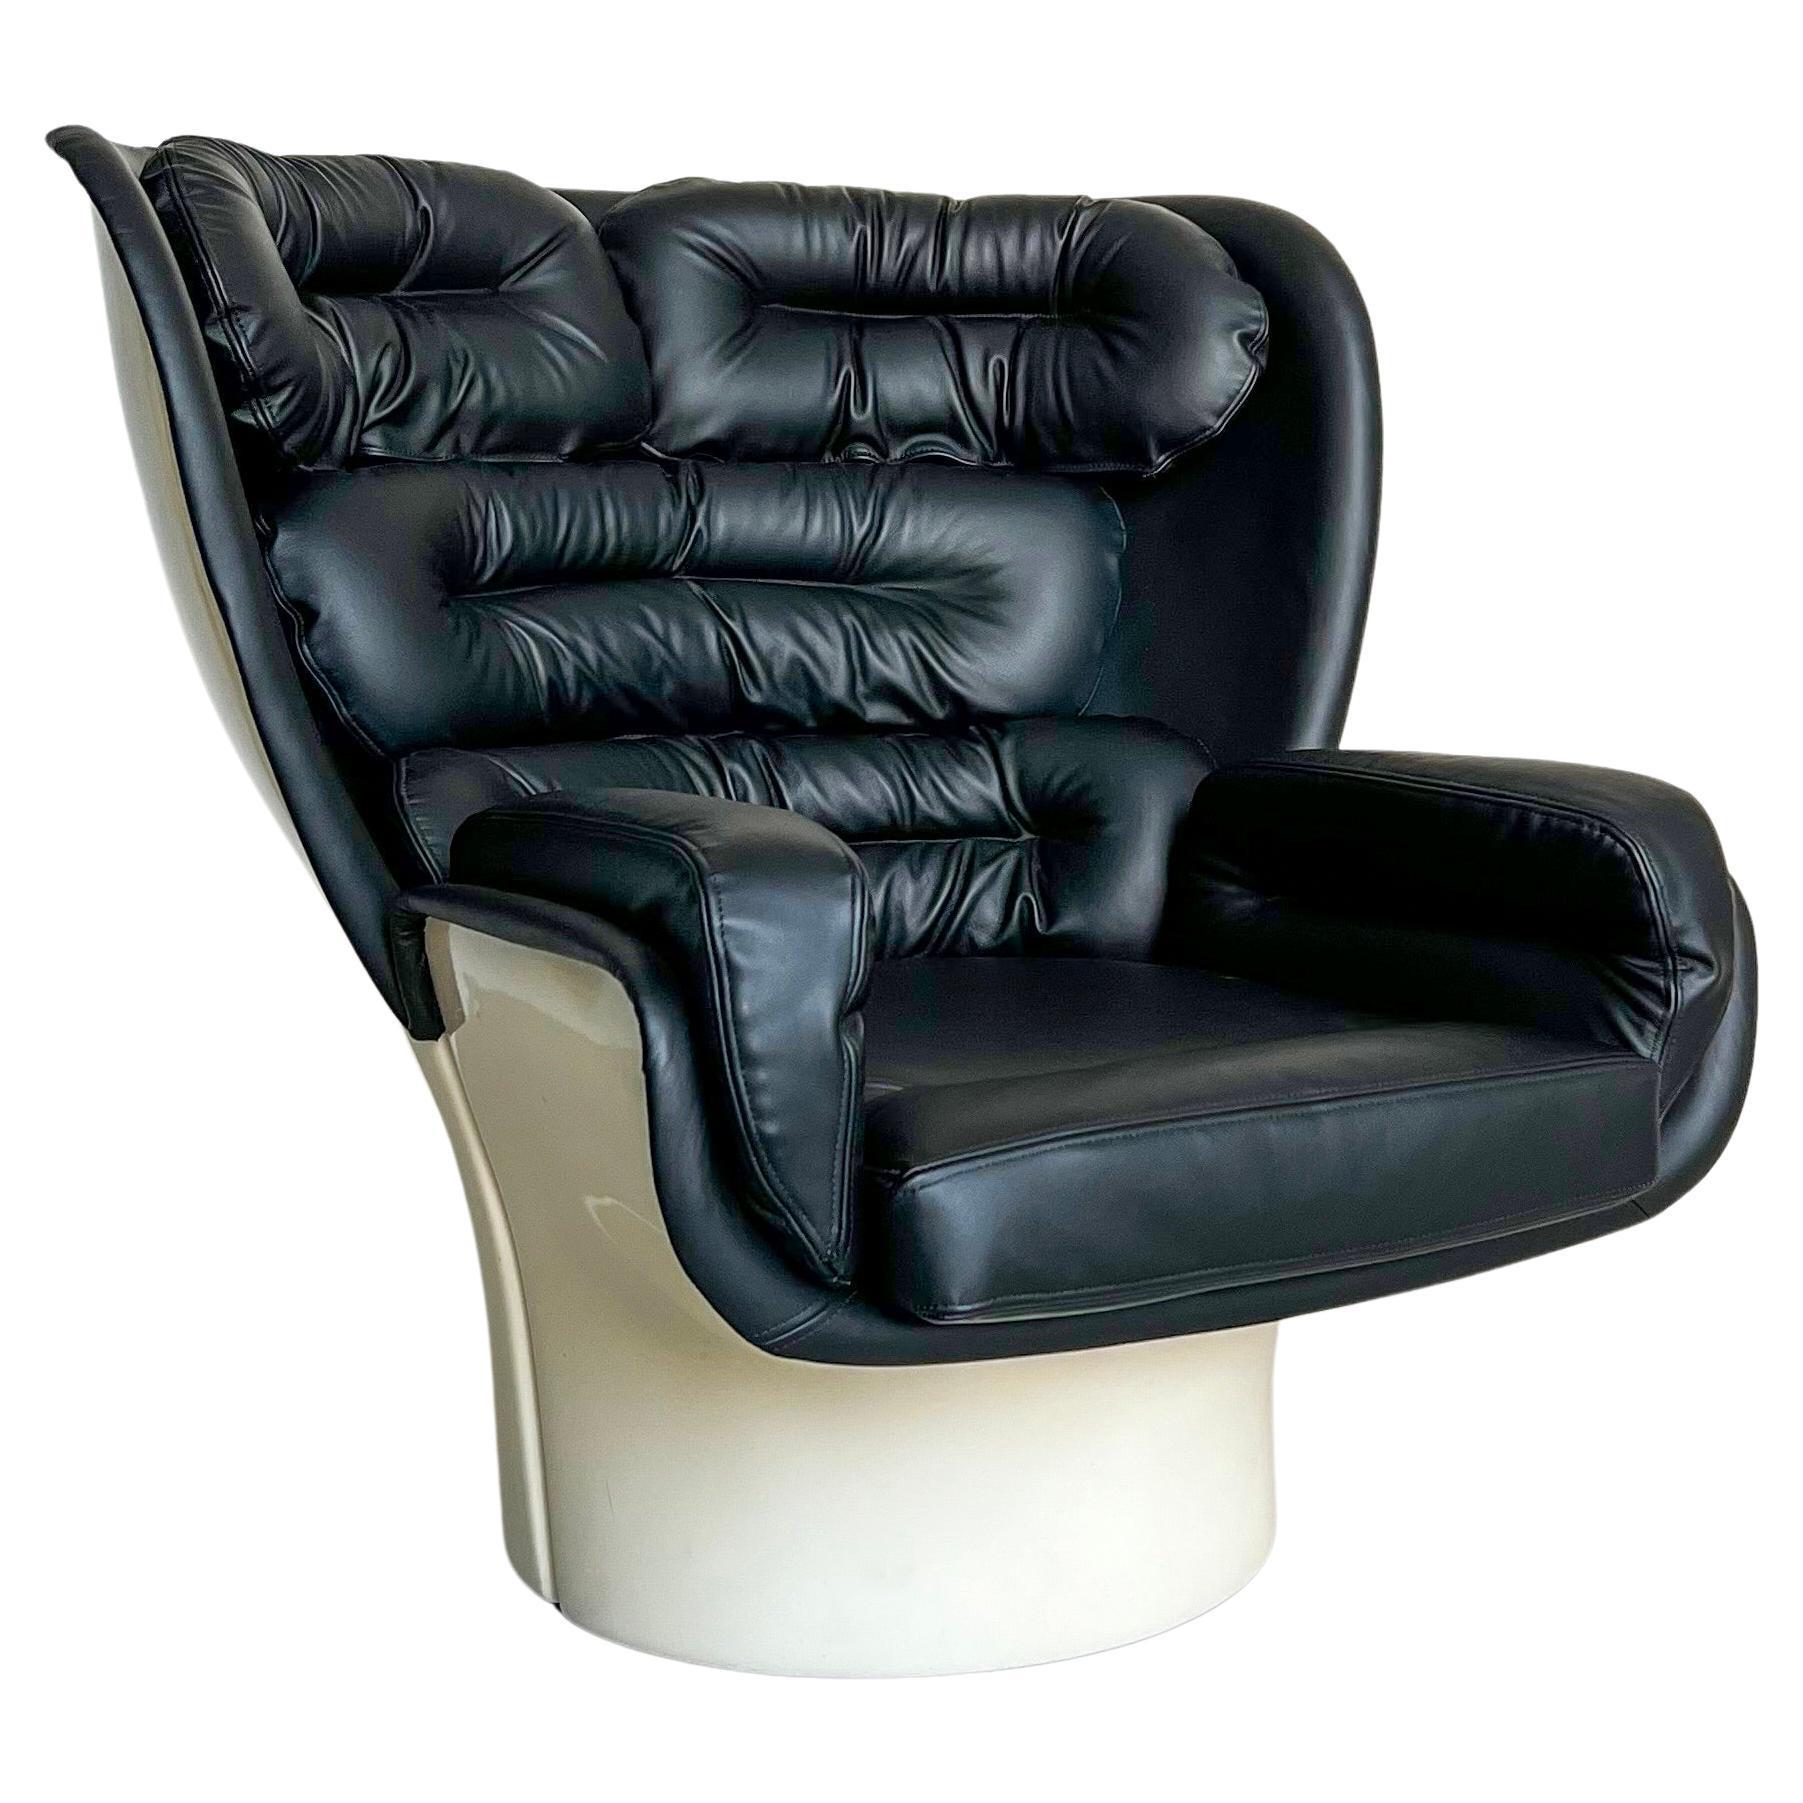 Space Age Living Room Armchair, Elda by Joe Colombo, Black Leather, Collectible For Sale